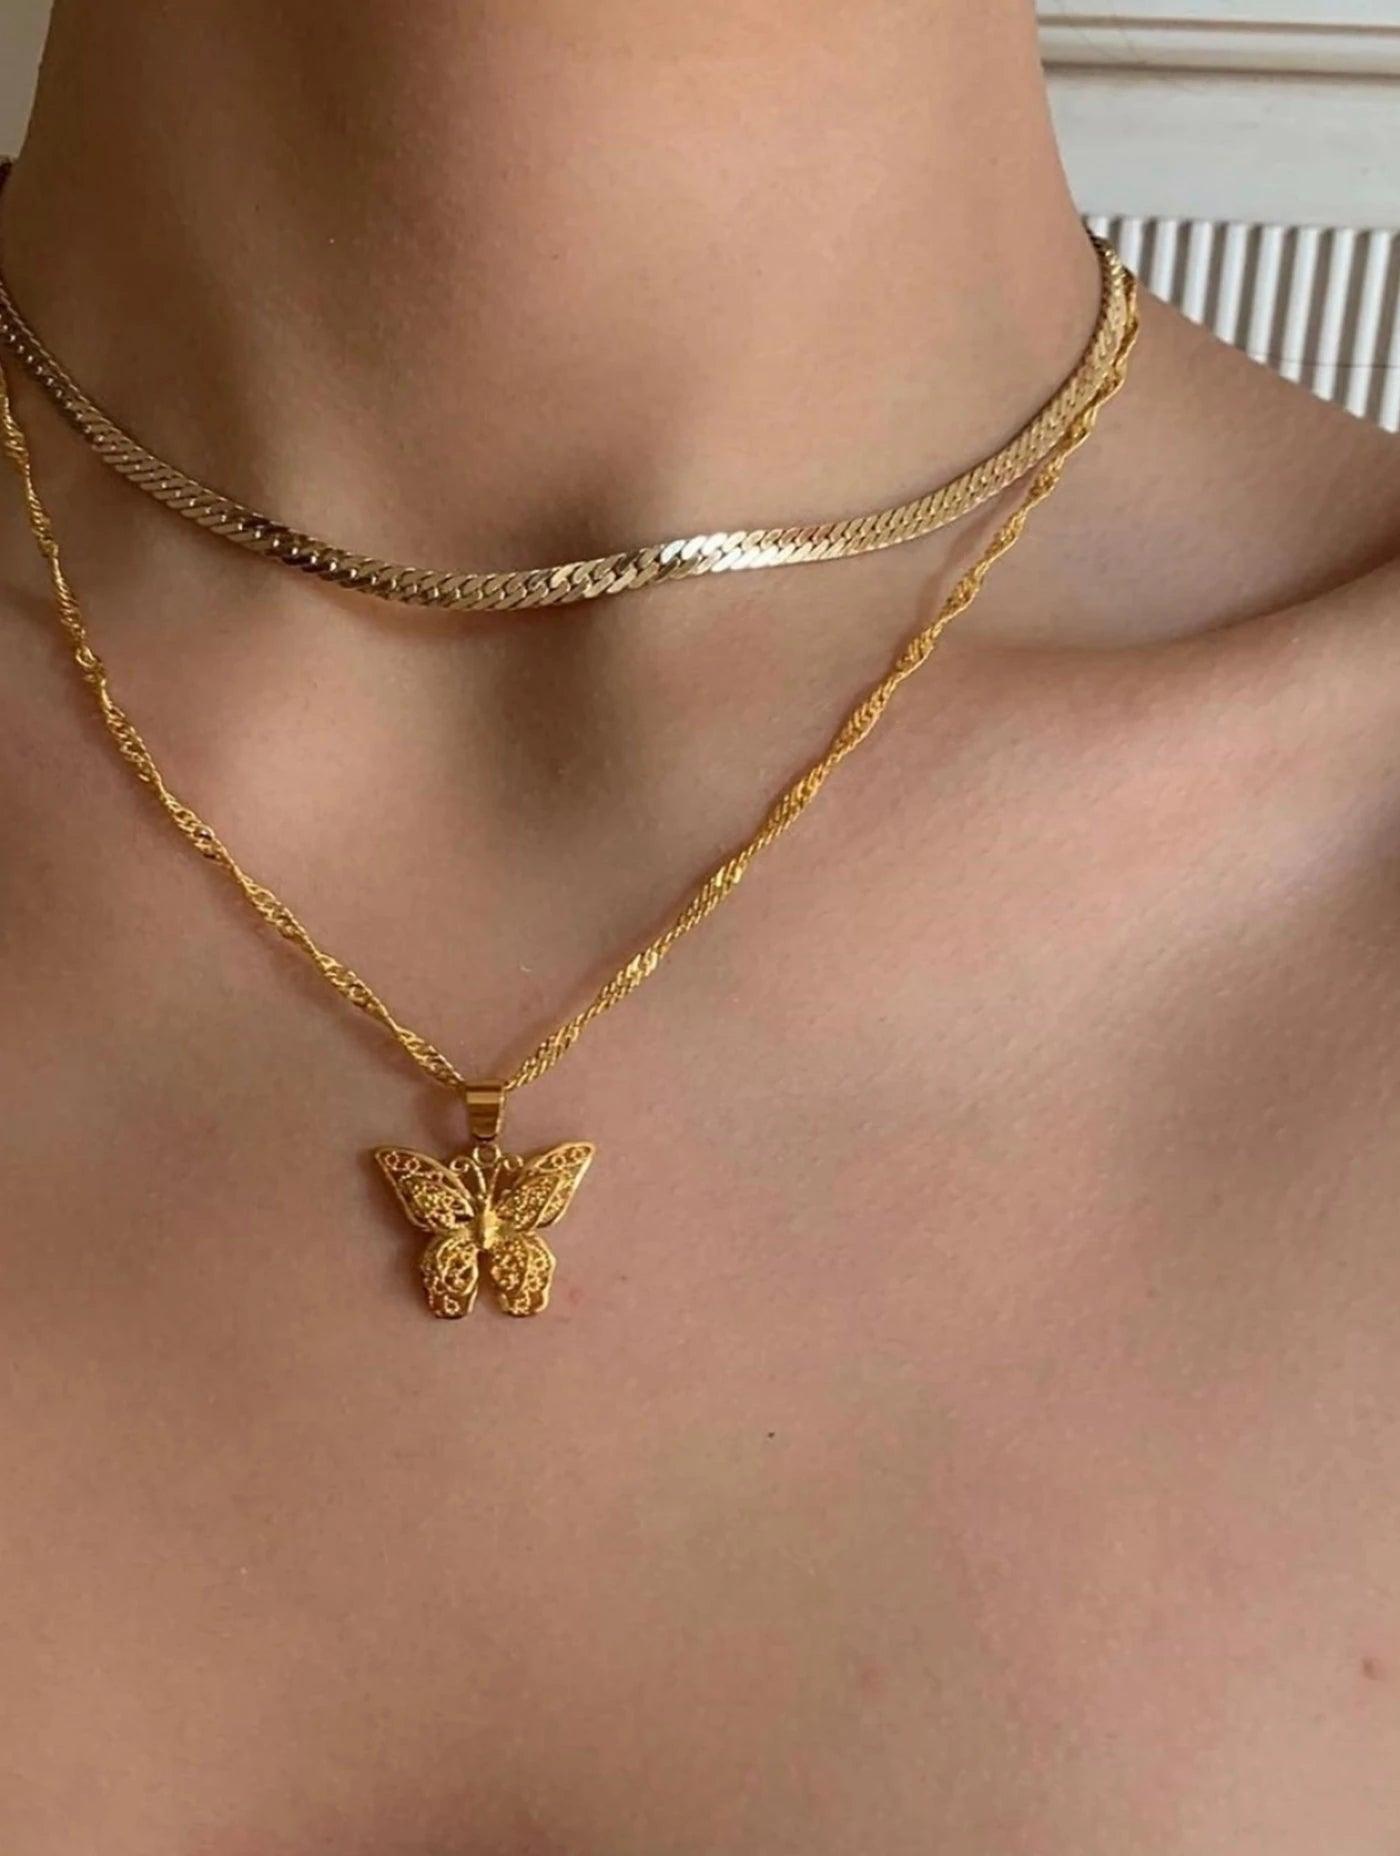 Gold Butterfly Necklace - Camillaboutiqueco